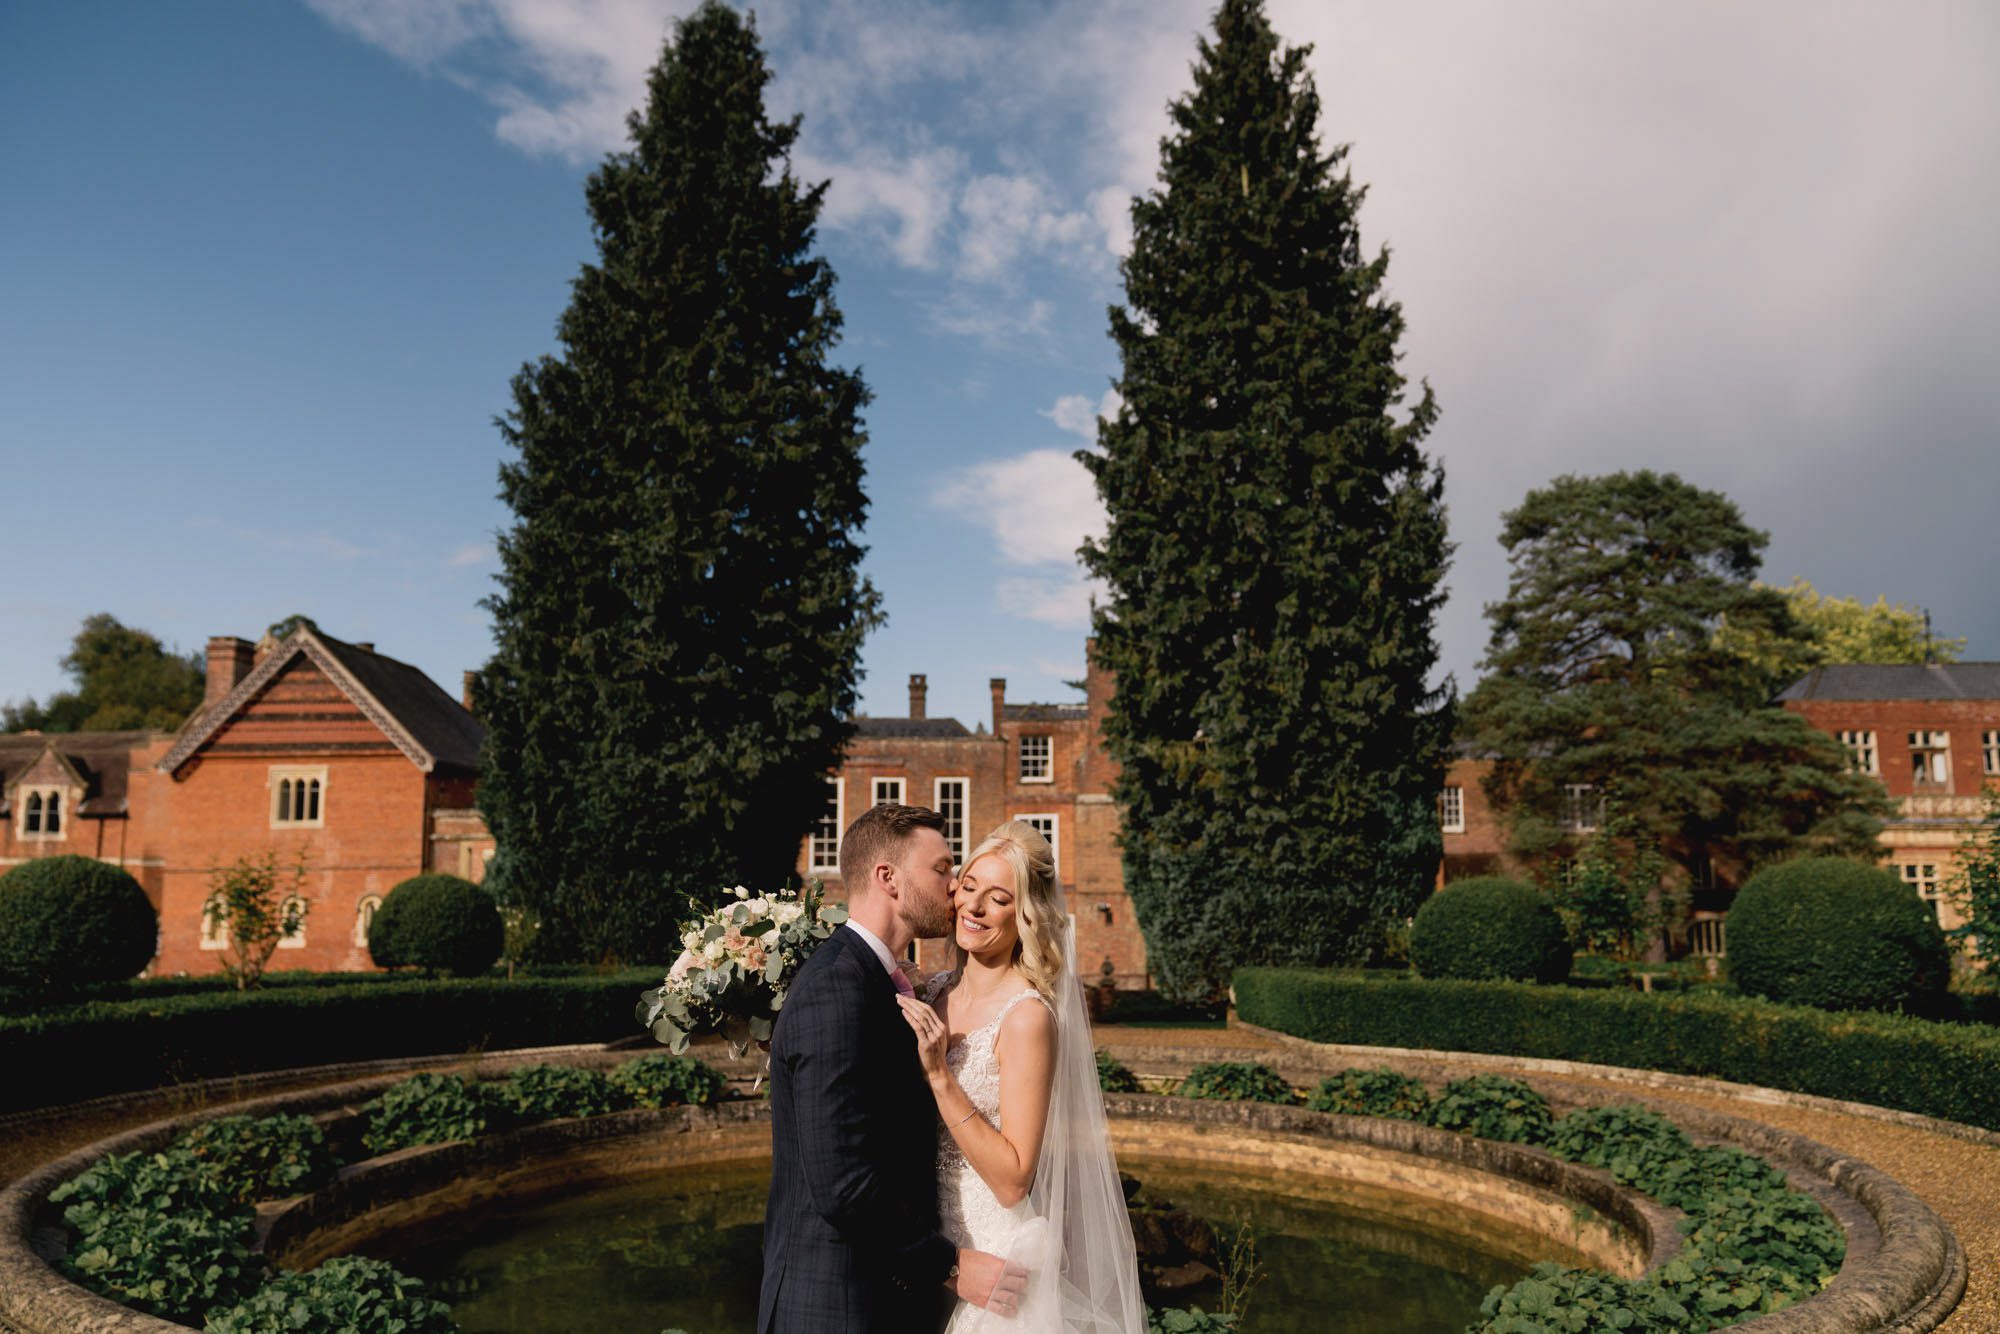 Bride and groom kiss on their wedding day at Wotton House in Surrey.